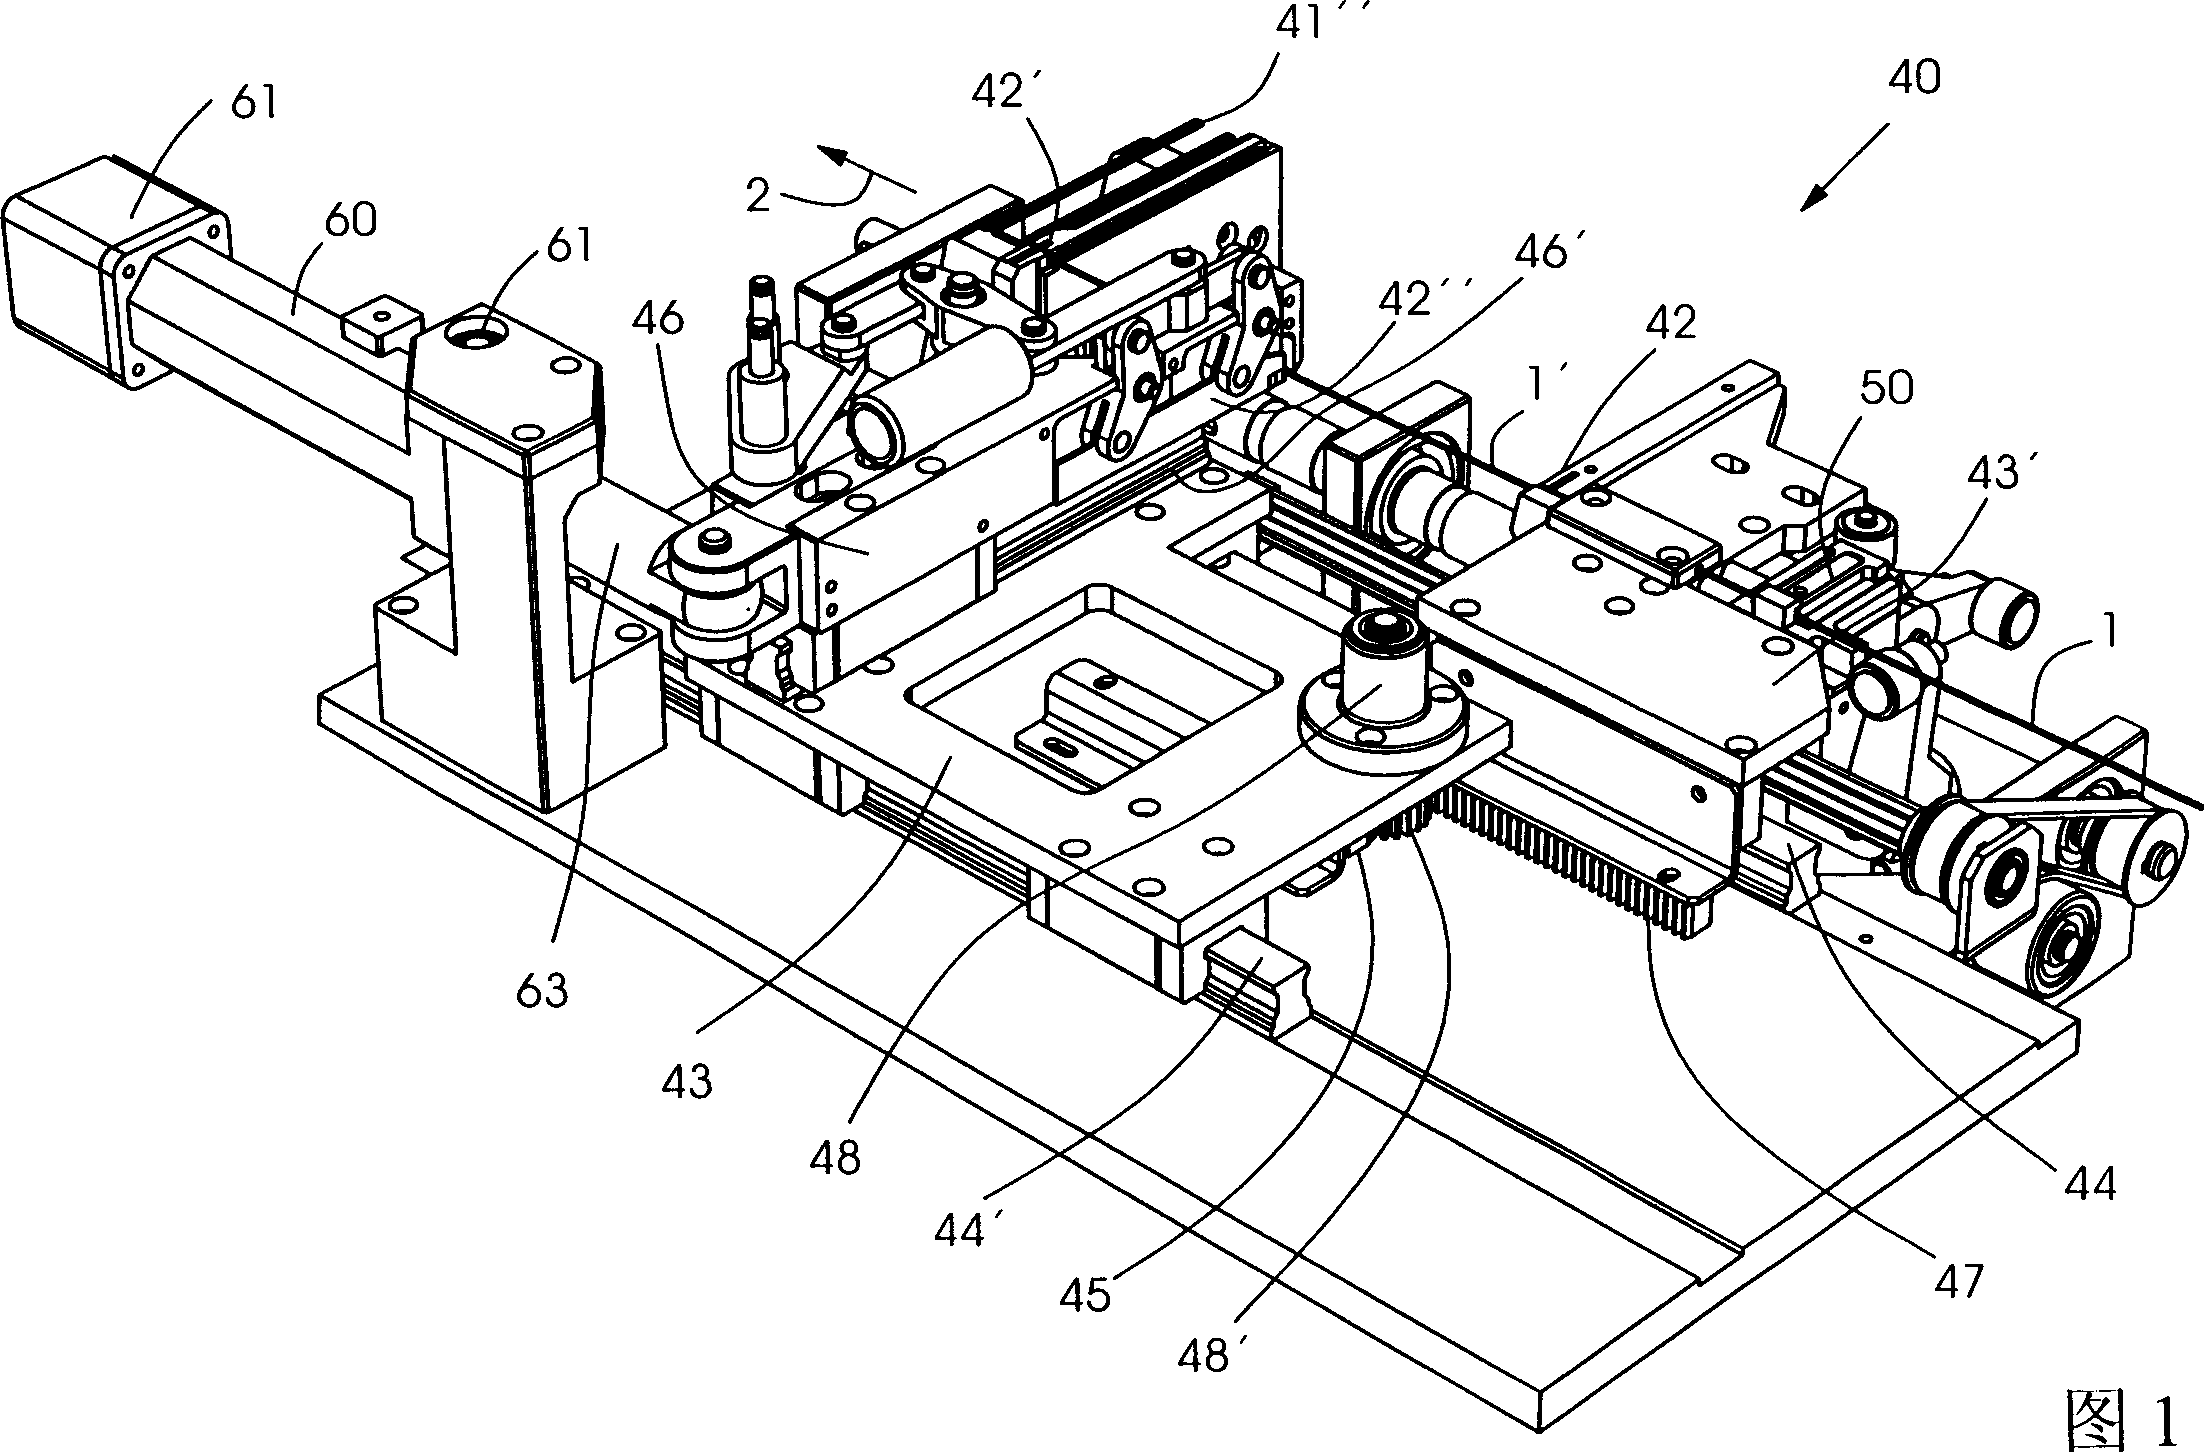 Apparatus for making metallic wire binding parts